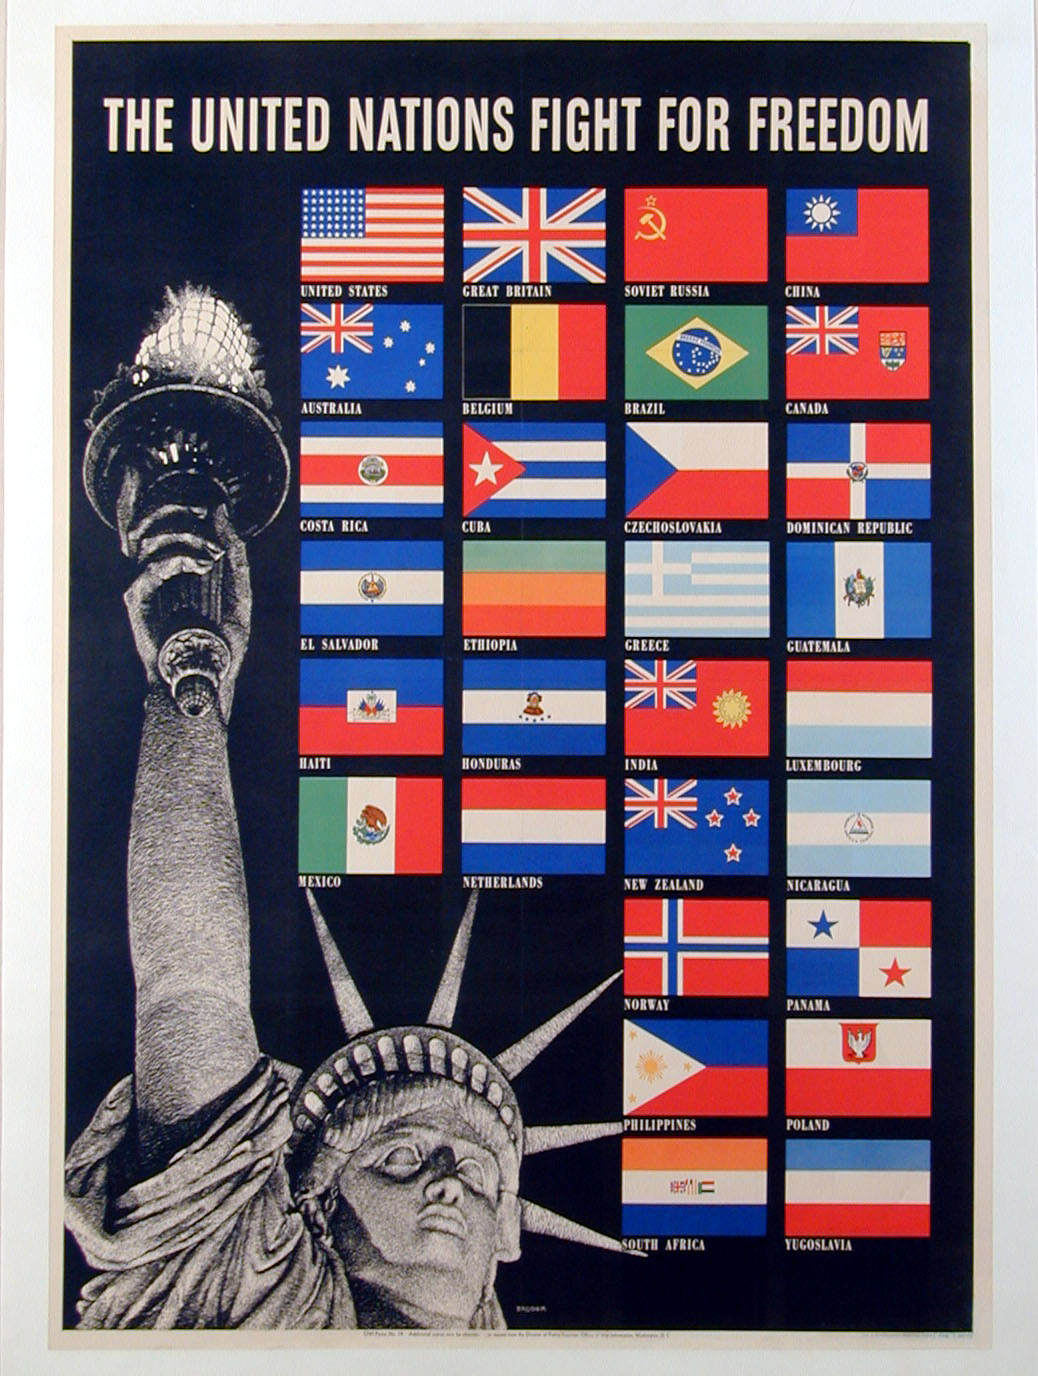 Original WWII poster - THE UNITED NATIONS FIGHT FOR FREEDOM by Broder